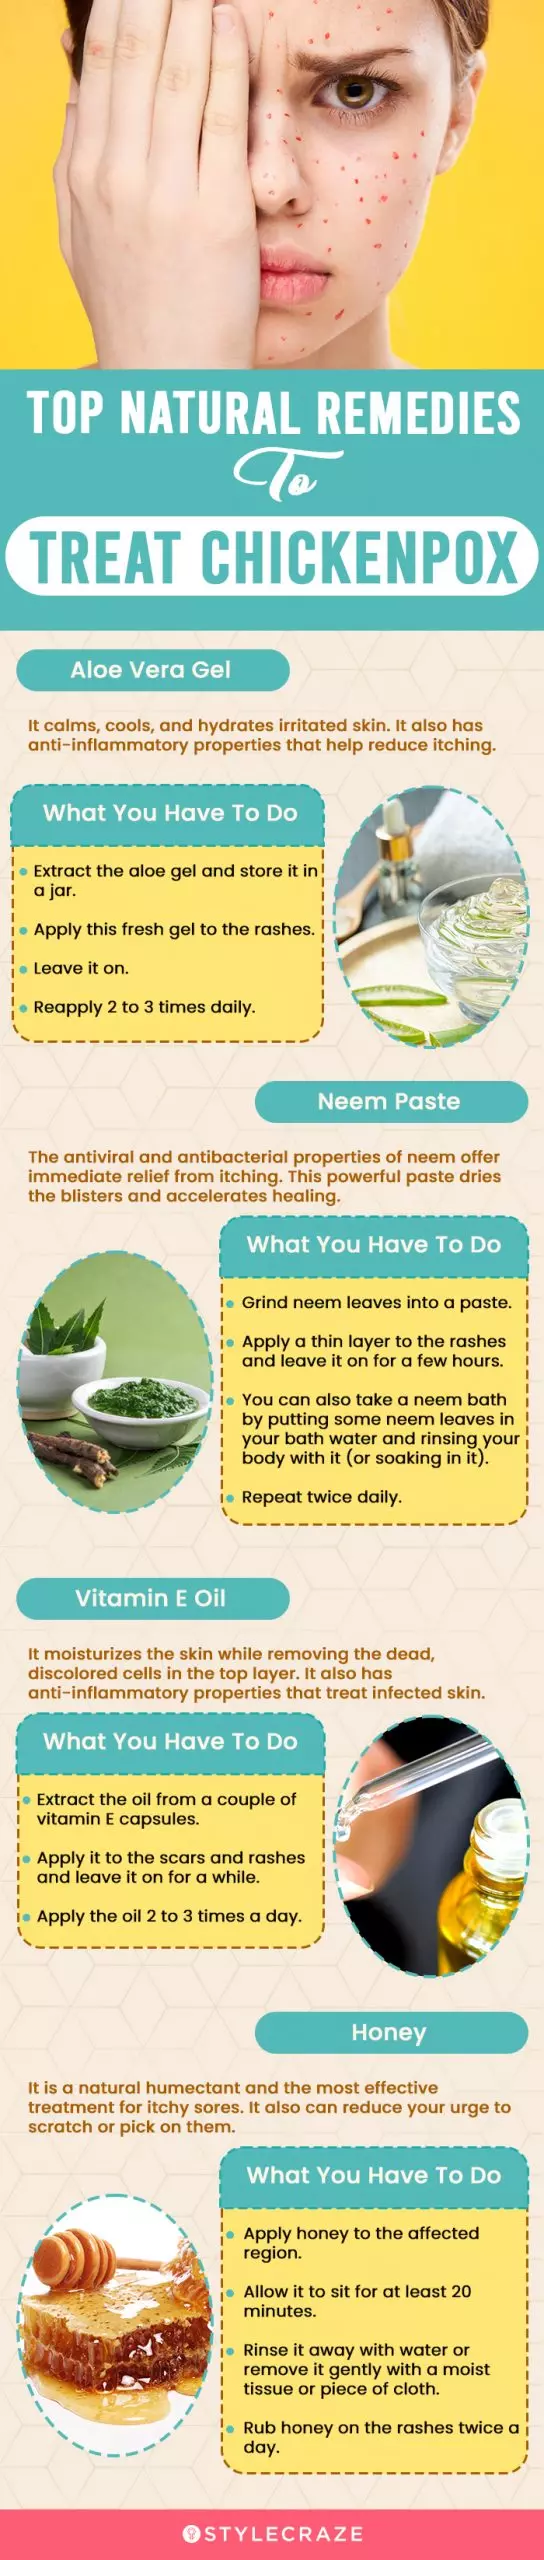 top natural remedies to treat chickenpox (infographic)